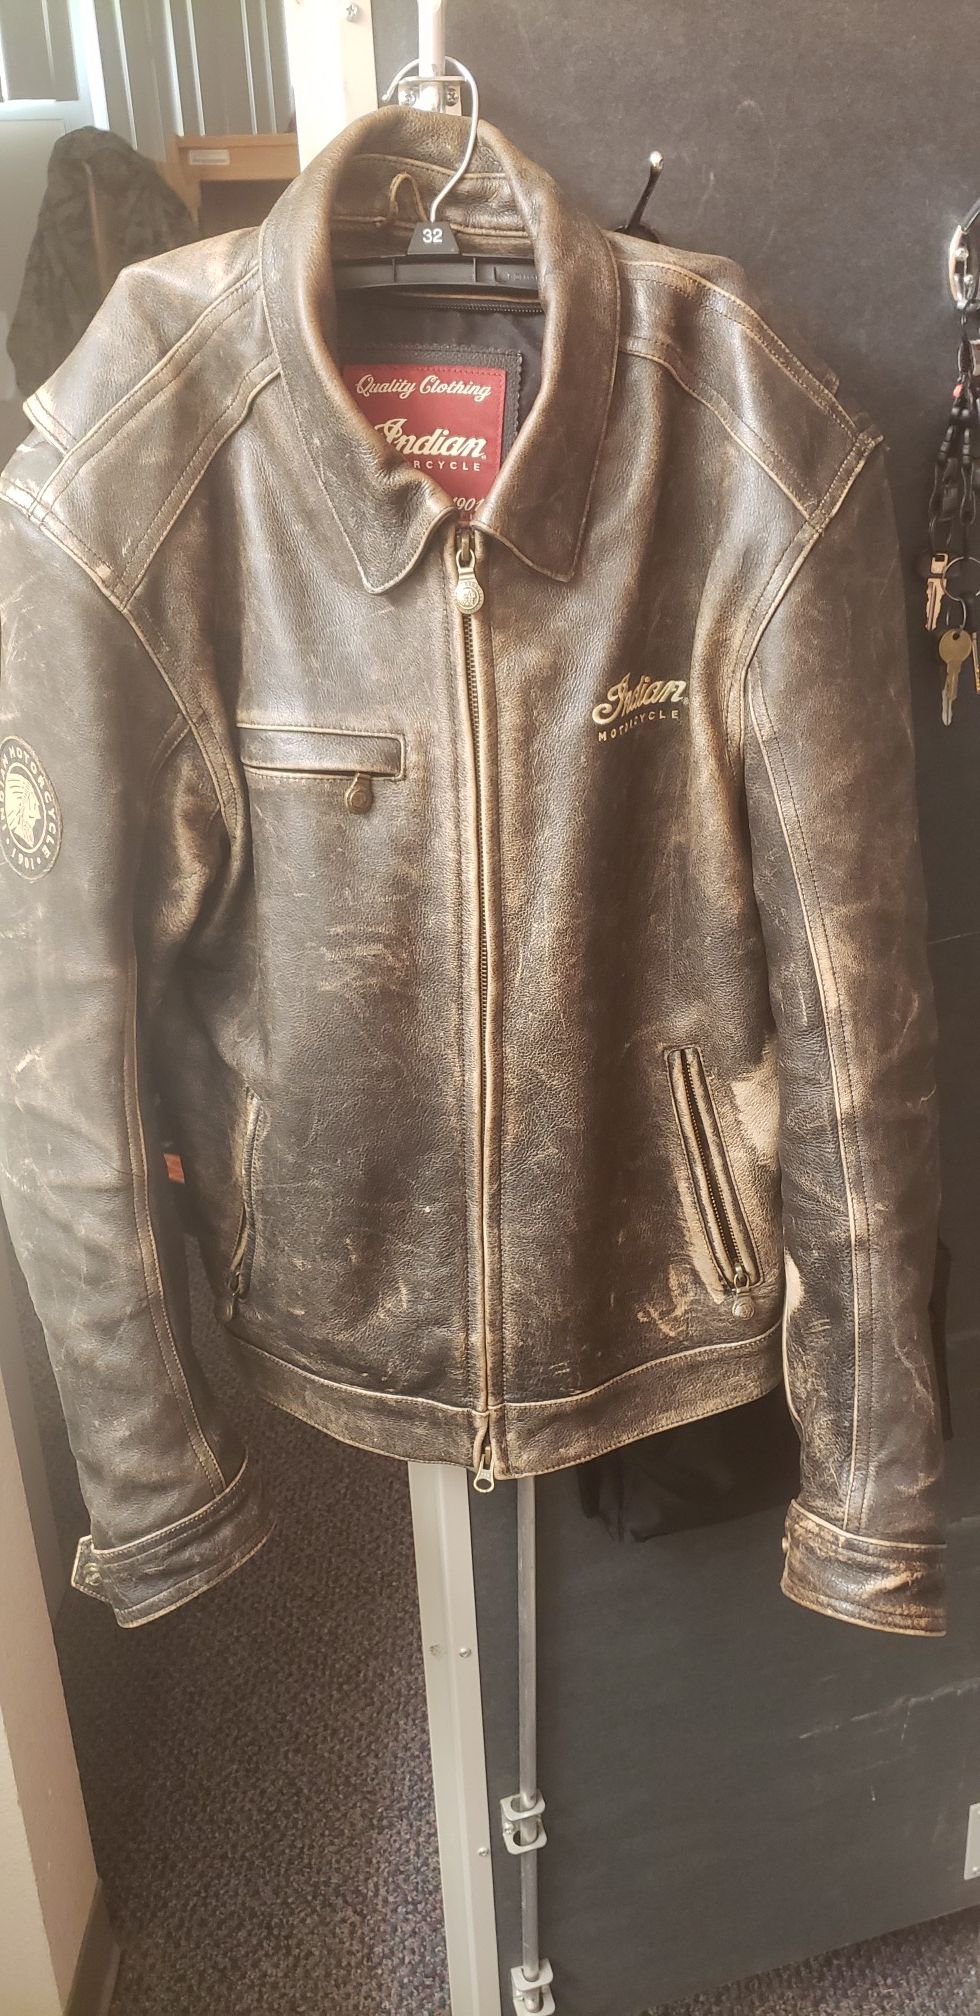 Heavy armored Indian motorcycle jacket